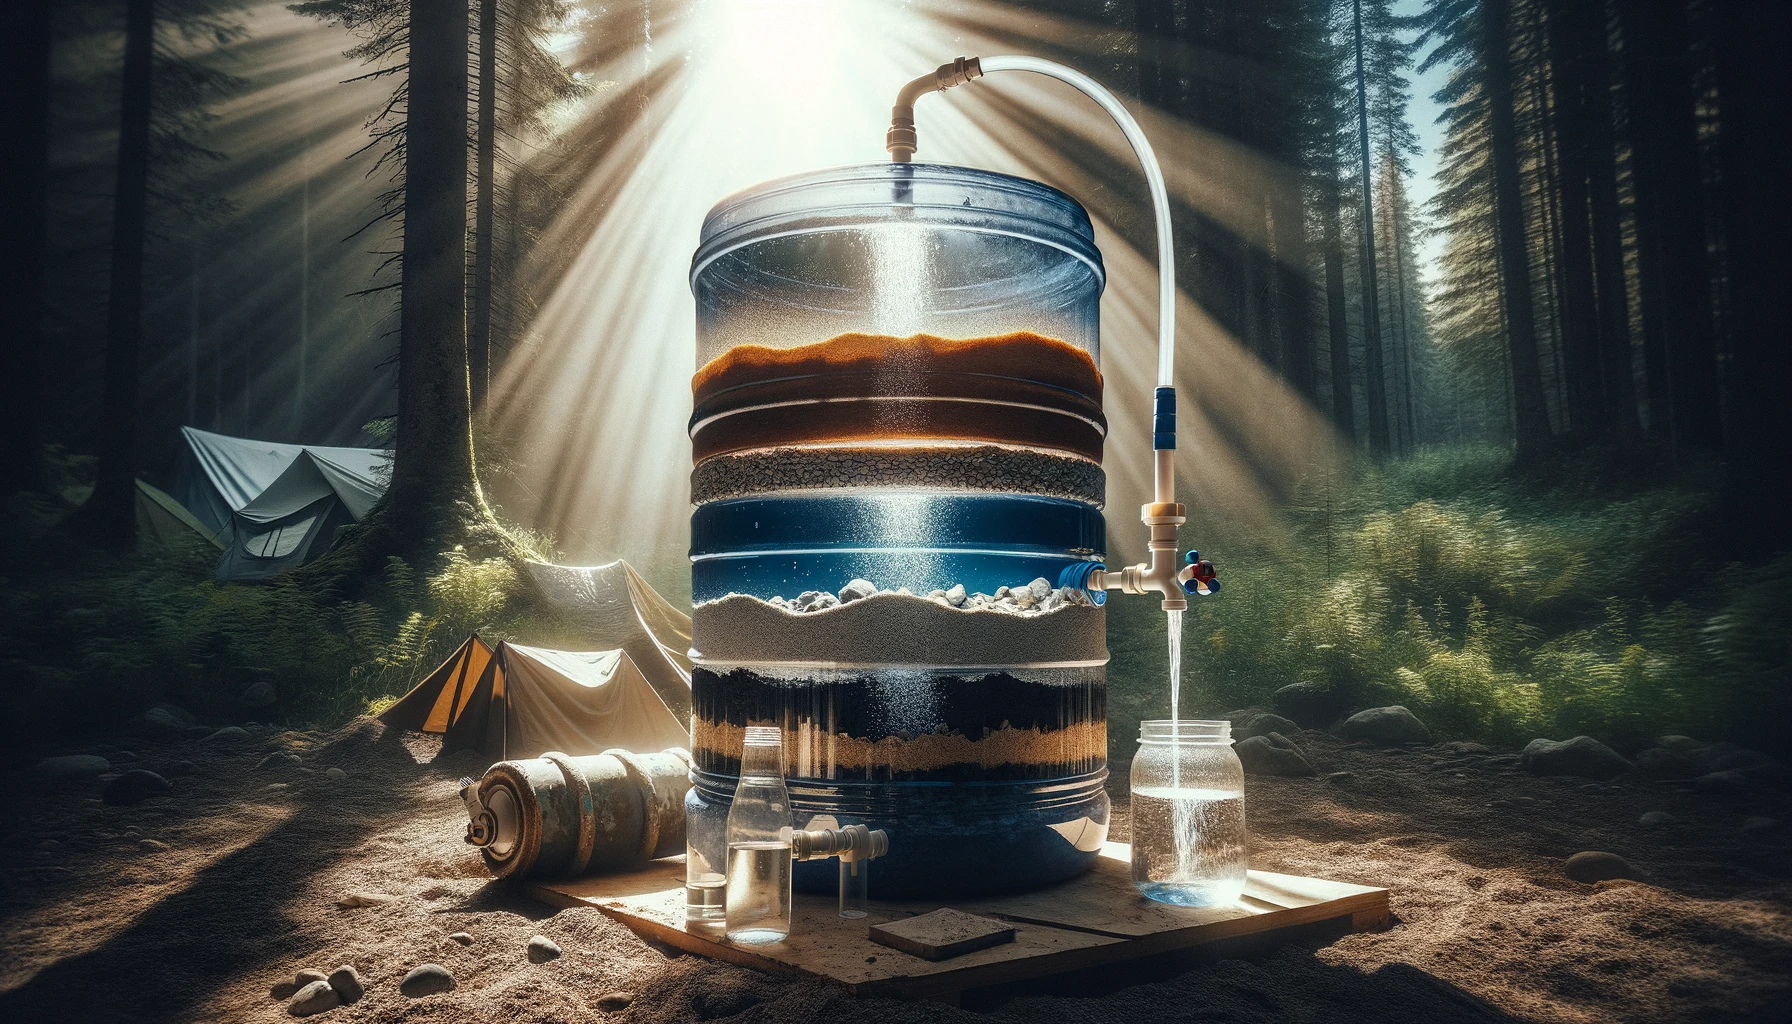 Innovative DIY water filtration system with a transparent barrel, manual pump, and natural materials, set in a lush survival camp, highlighted by sunlight filtering through the forest, epitomizing adventure and self-reliance